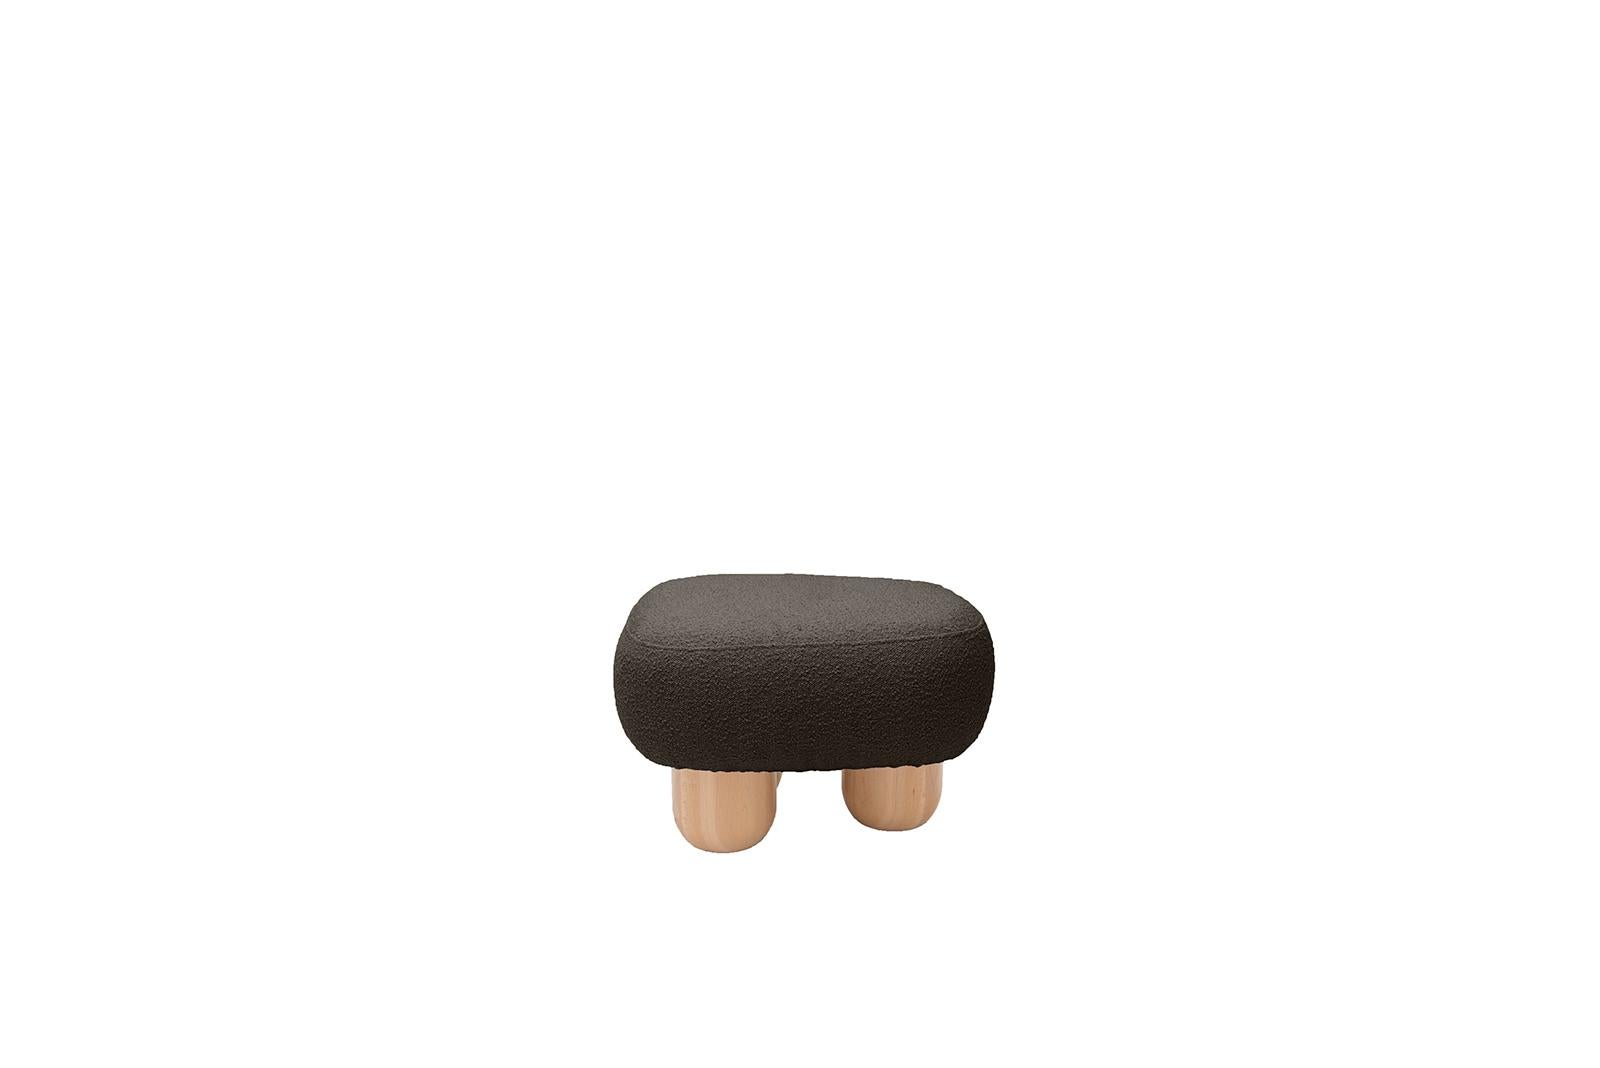 Object 049 mouse pouf by NG Design
Dimensions: D 64 x W 51 x H 41 cm.
Materials: boucle upholstery, solid oak.

Also available: All of objects available in different materials and colors on demand.

Will you use the object049 pouf as an